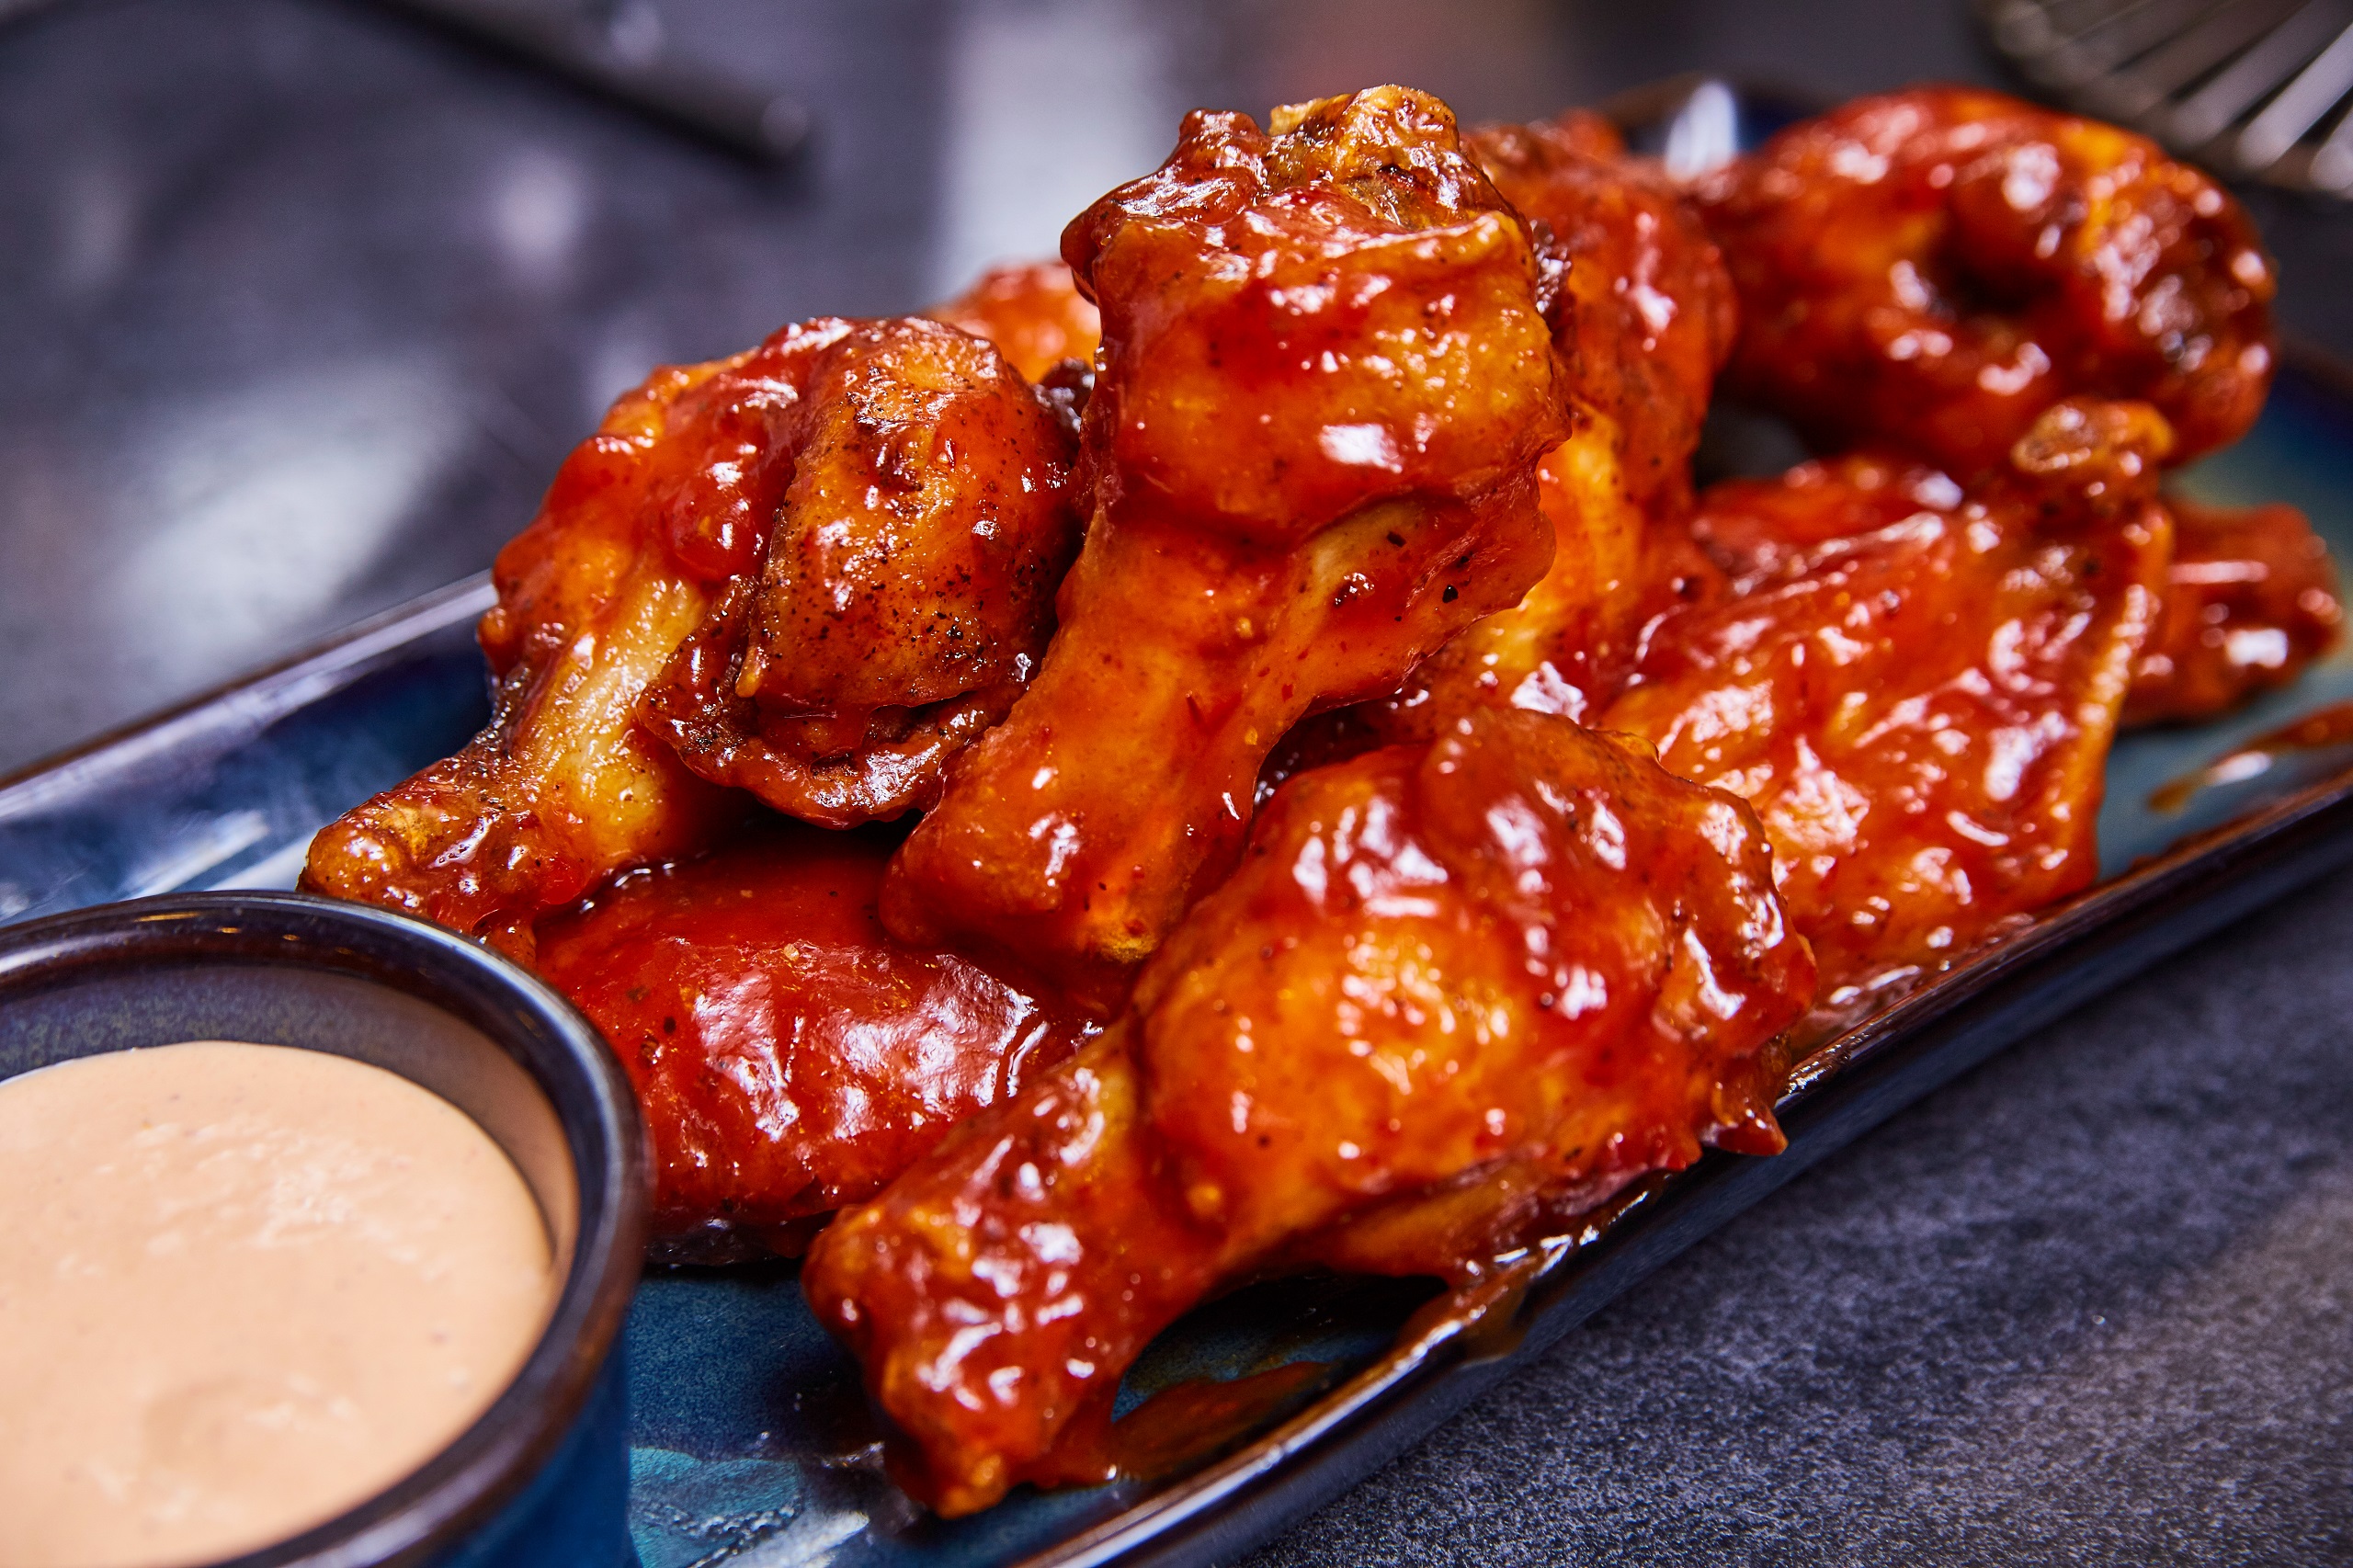 Baked sticky chicken wings served with dipping sauce on a modern blue plate, in a stylish setting.